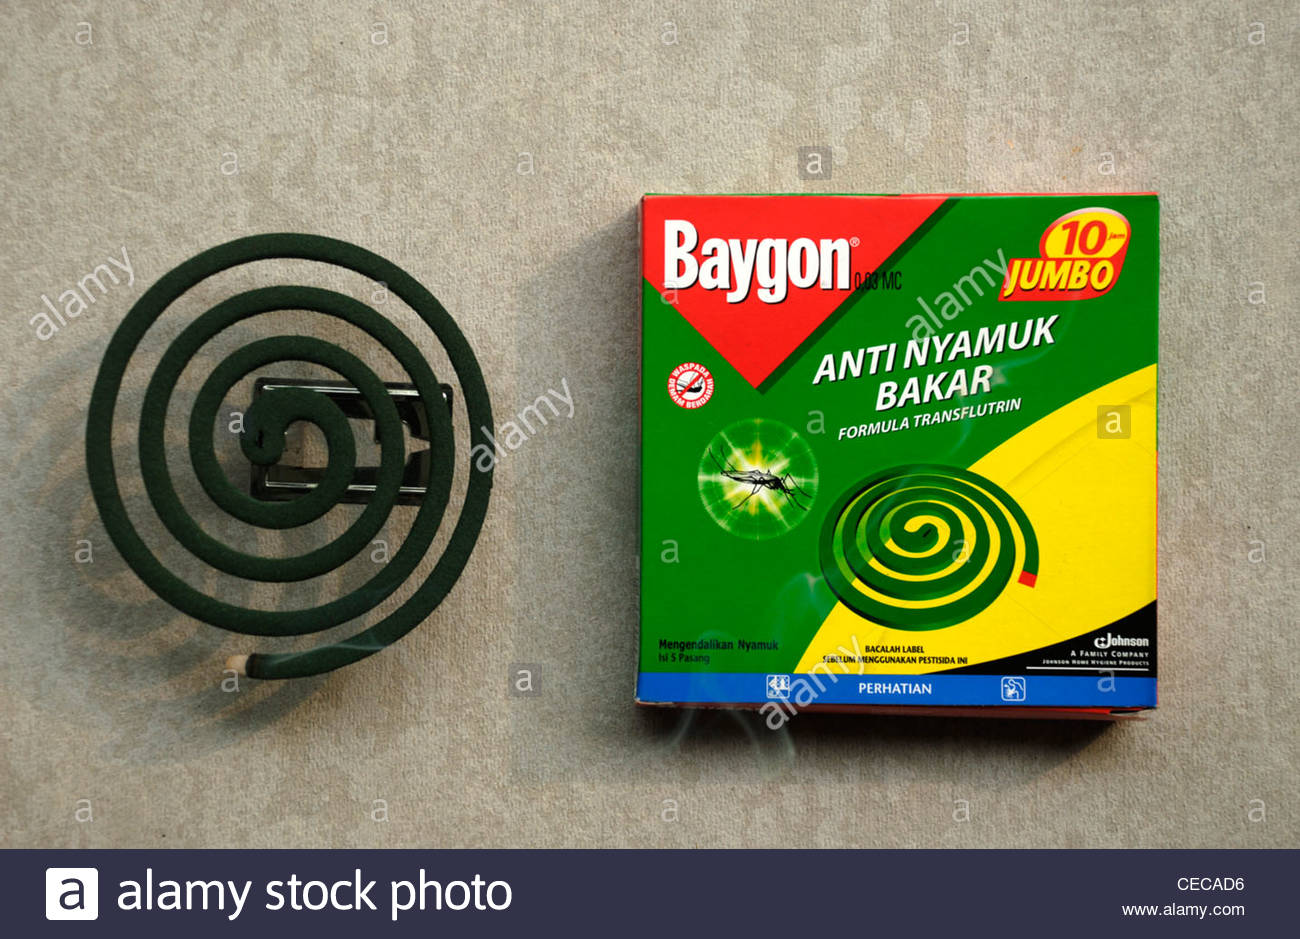 A slow burning coil of mosquito repellent and the Baygon 